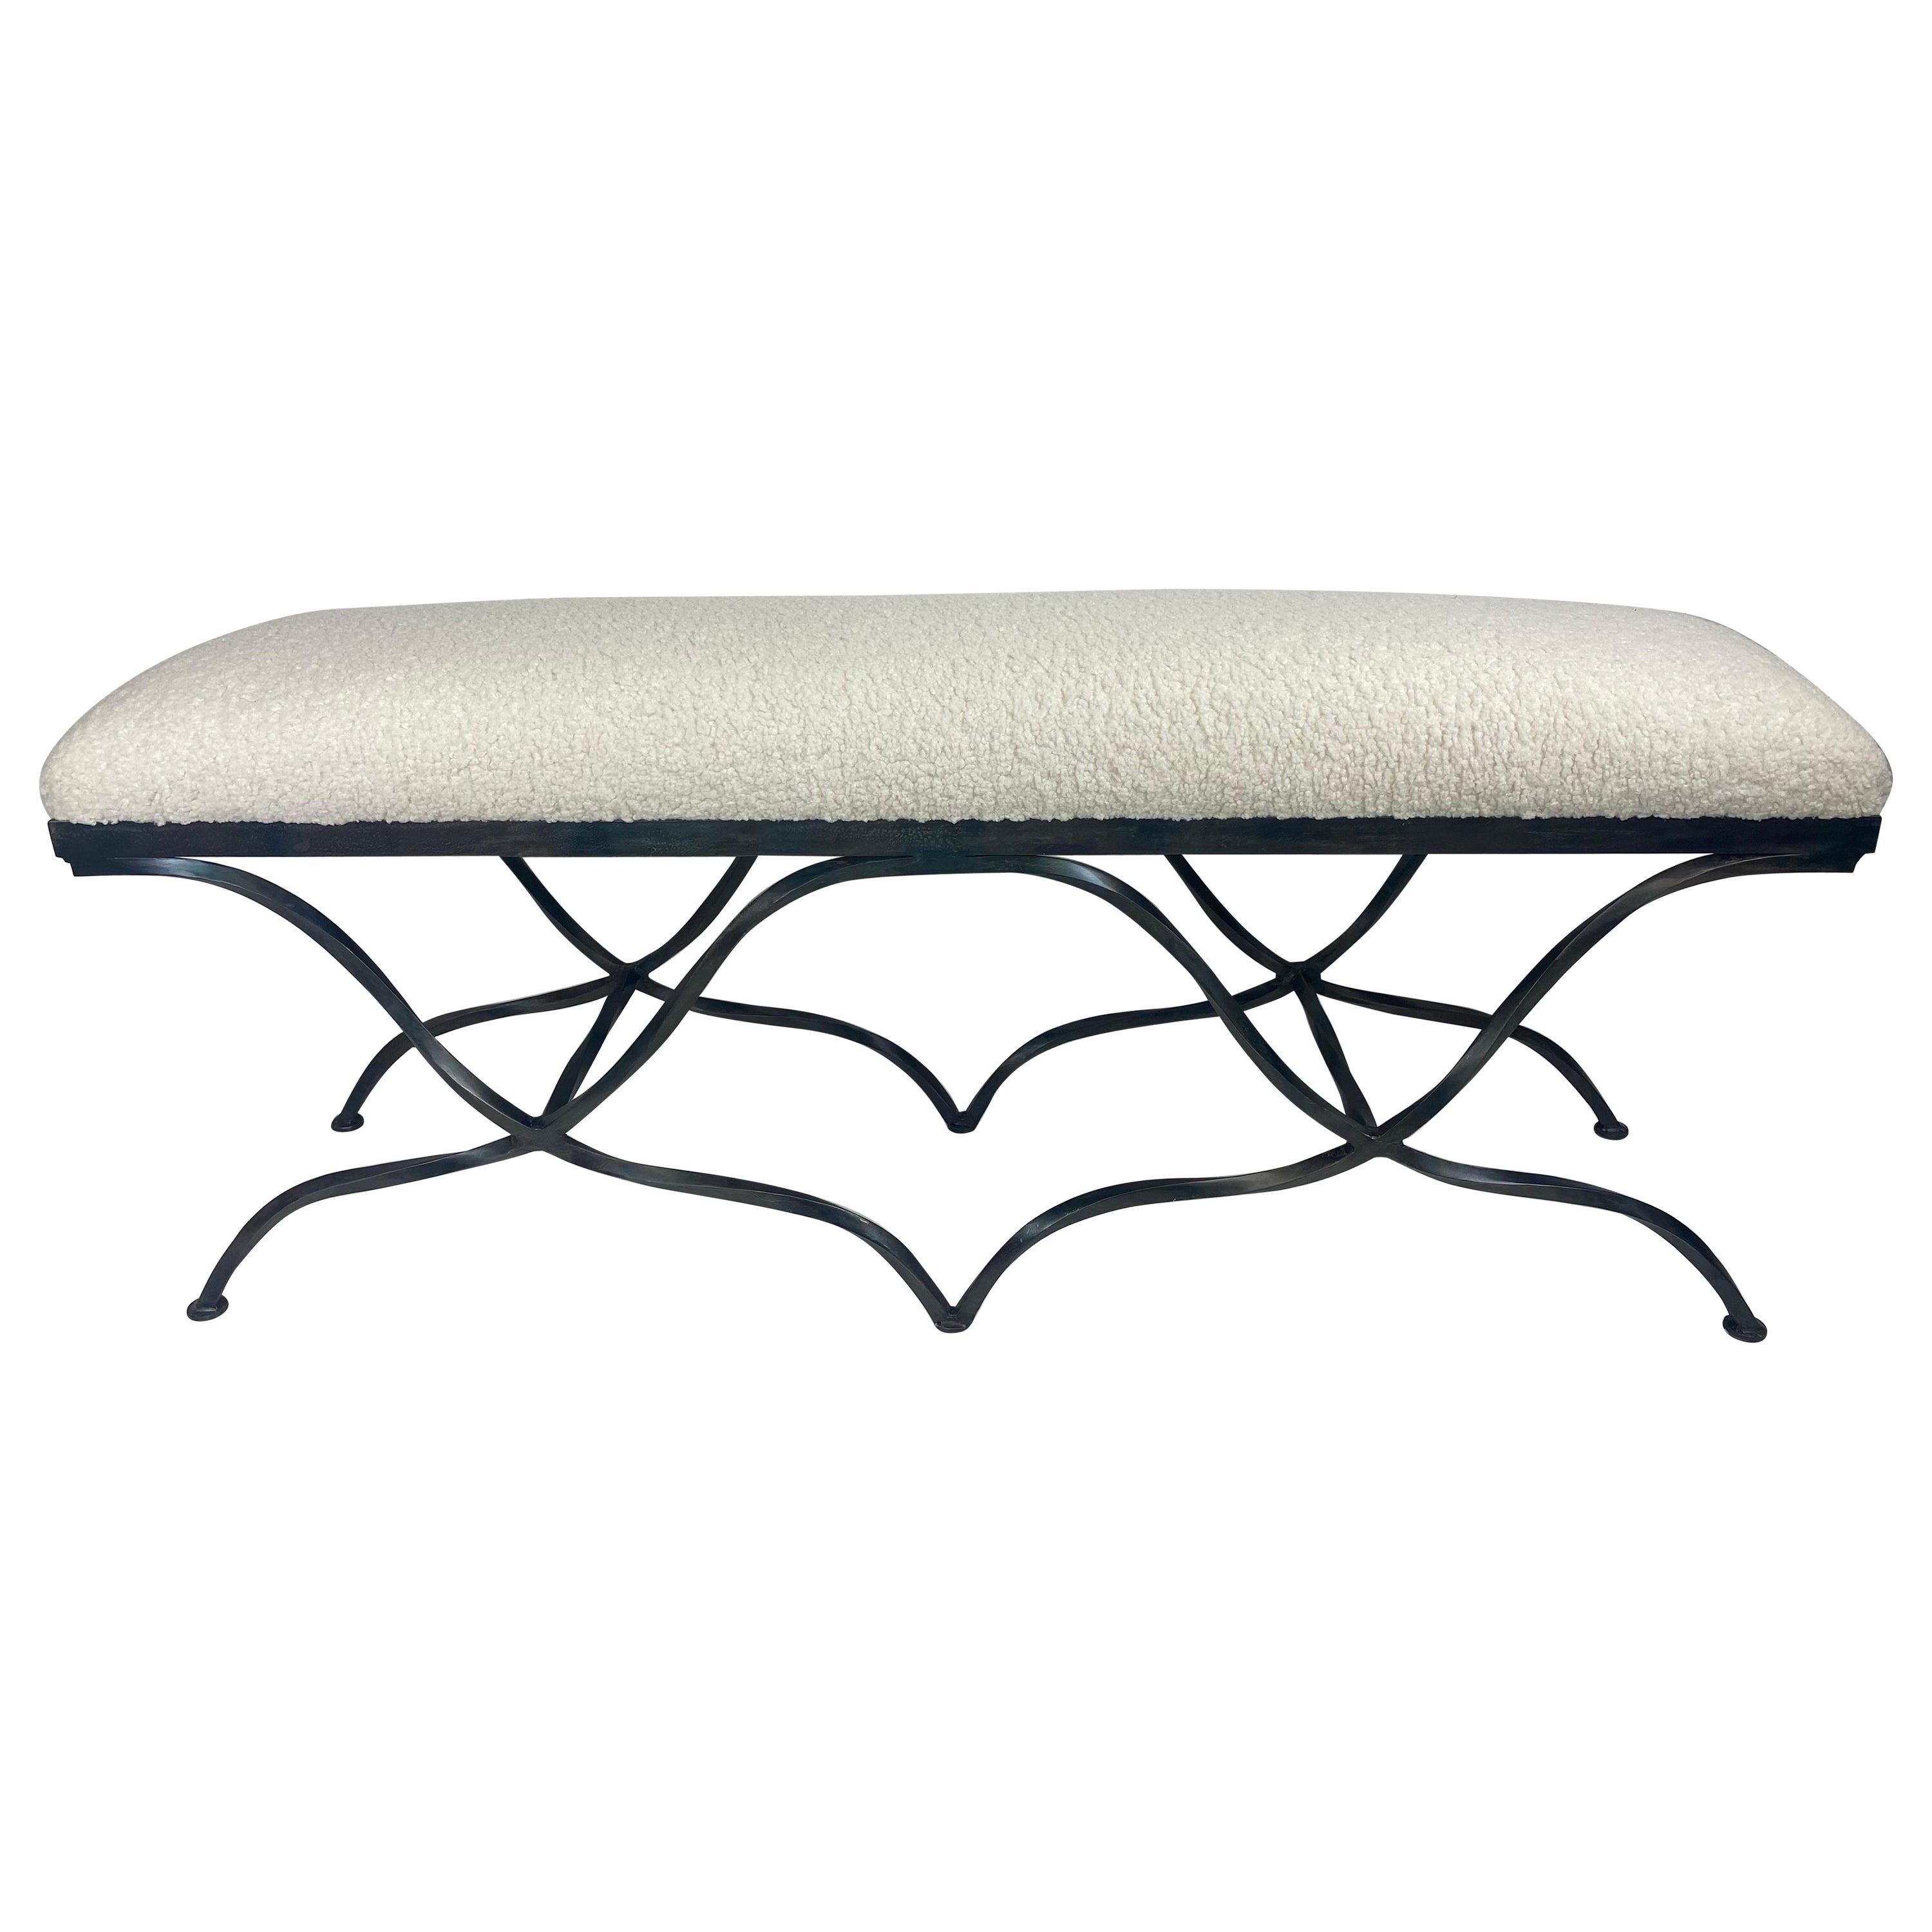 Late 20th century hand wrought iron upholstered bench